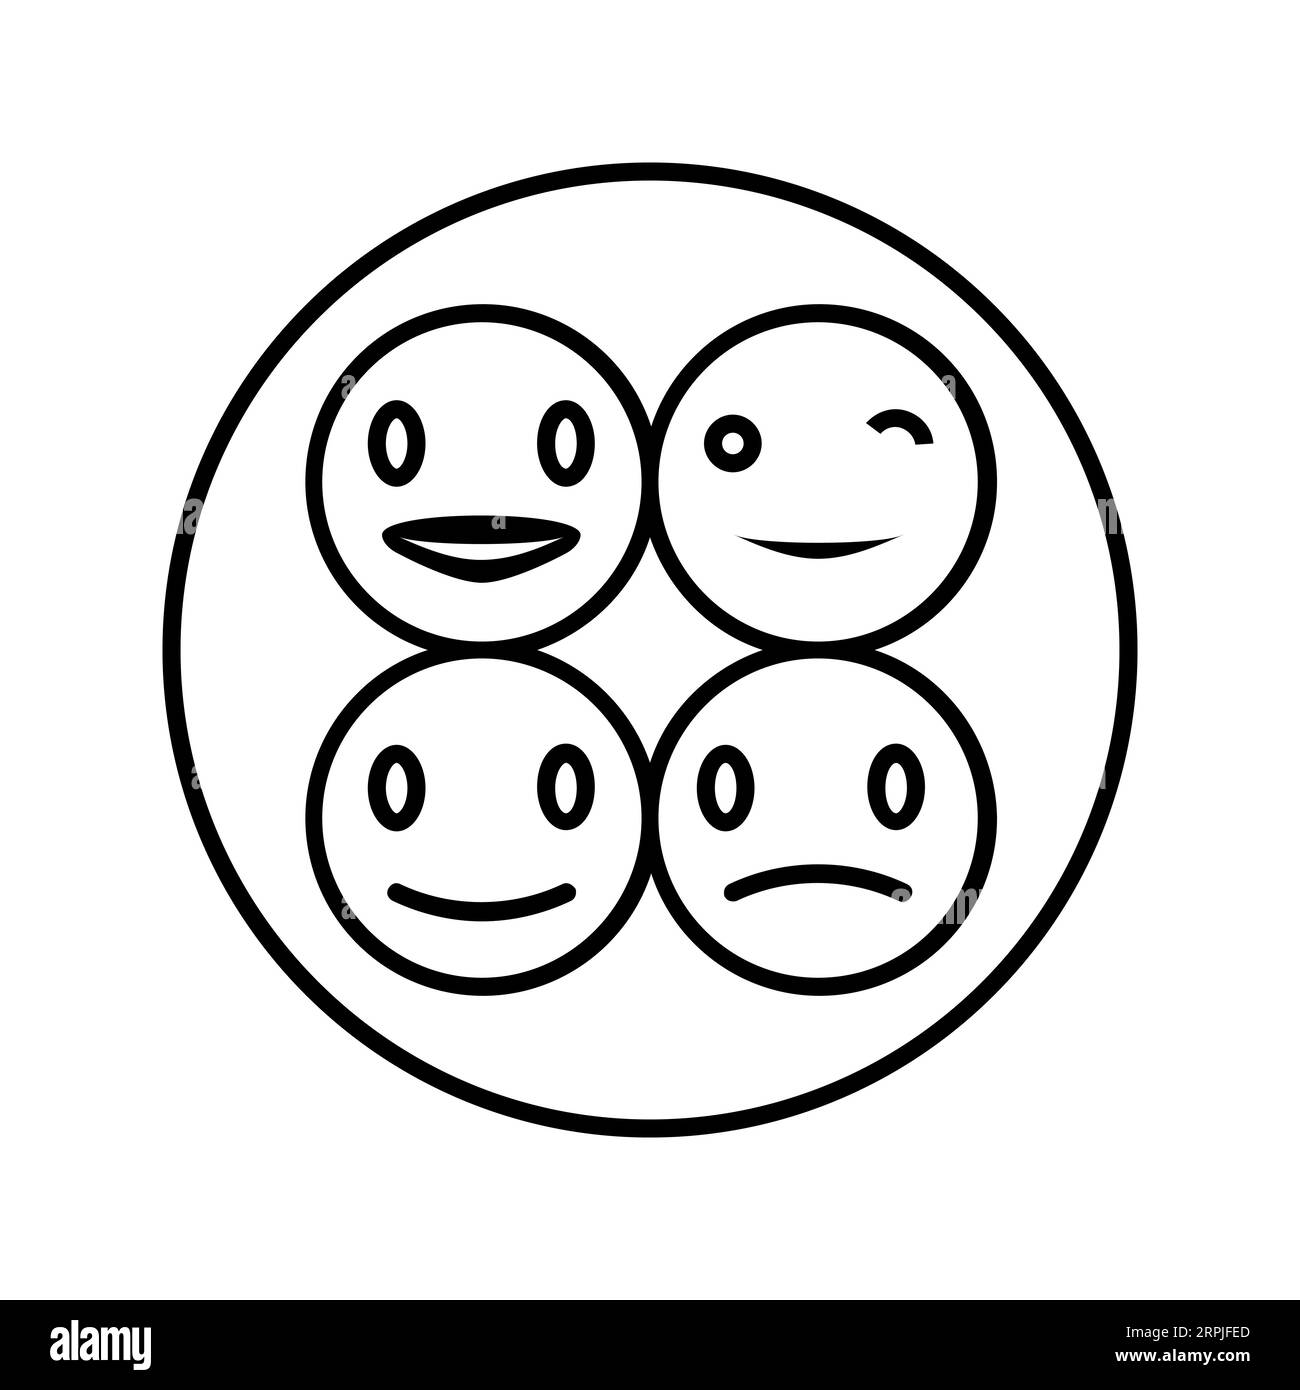 EMOTICONS Editable and Resizeable Vector Icon Stock Vector